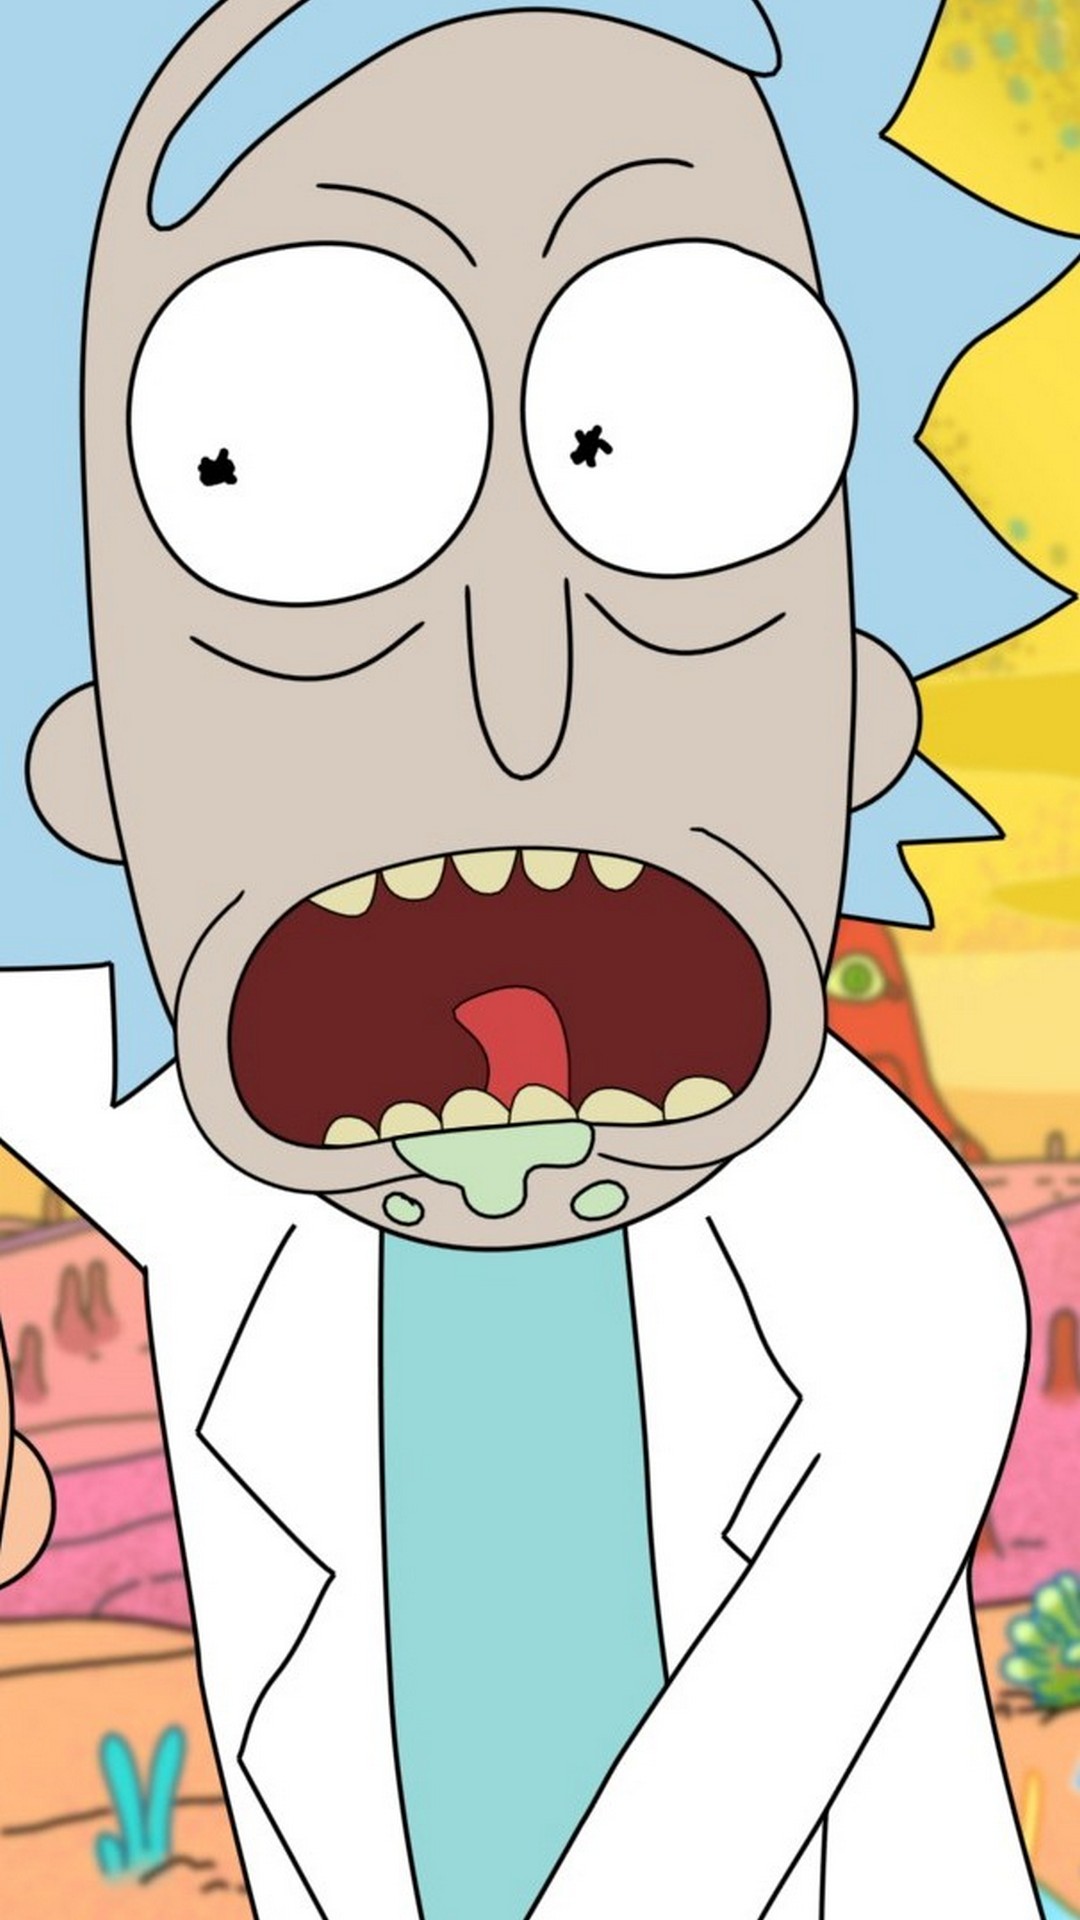 iPhone Wallpaper Rick and Morty 1080p